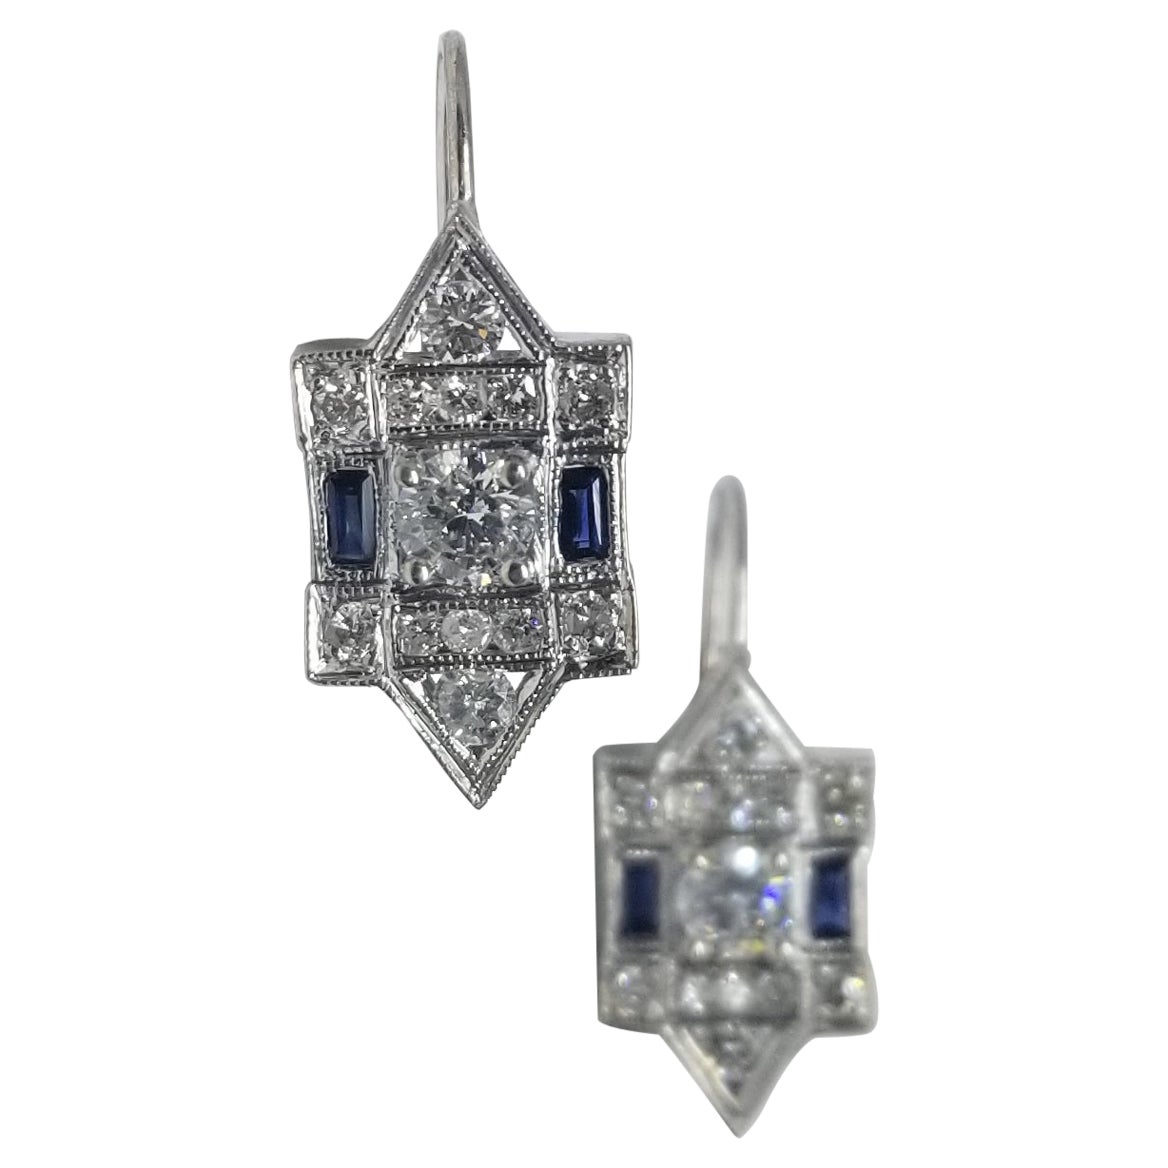 Classic Art Deco Style Inspired Earrings with Beautiful Diamonds and Sapphire S